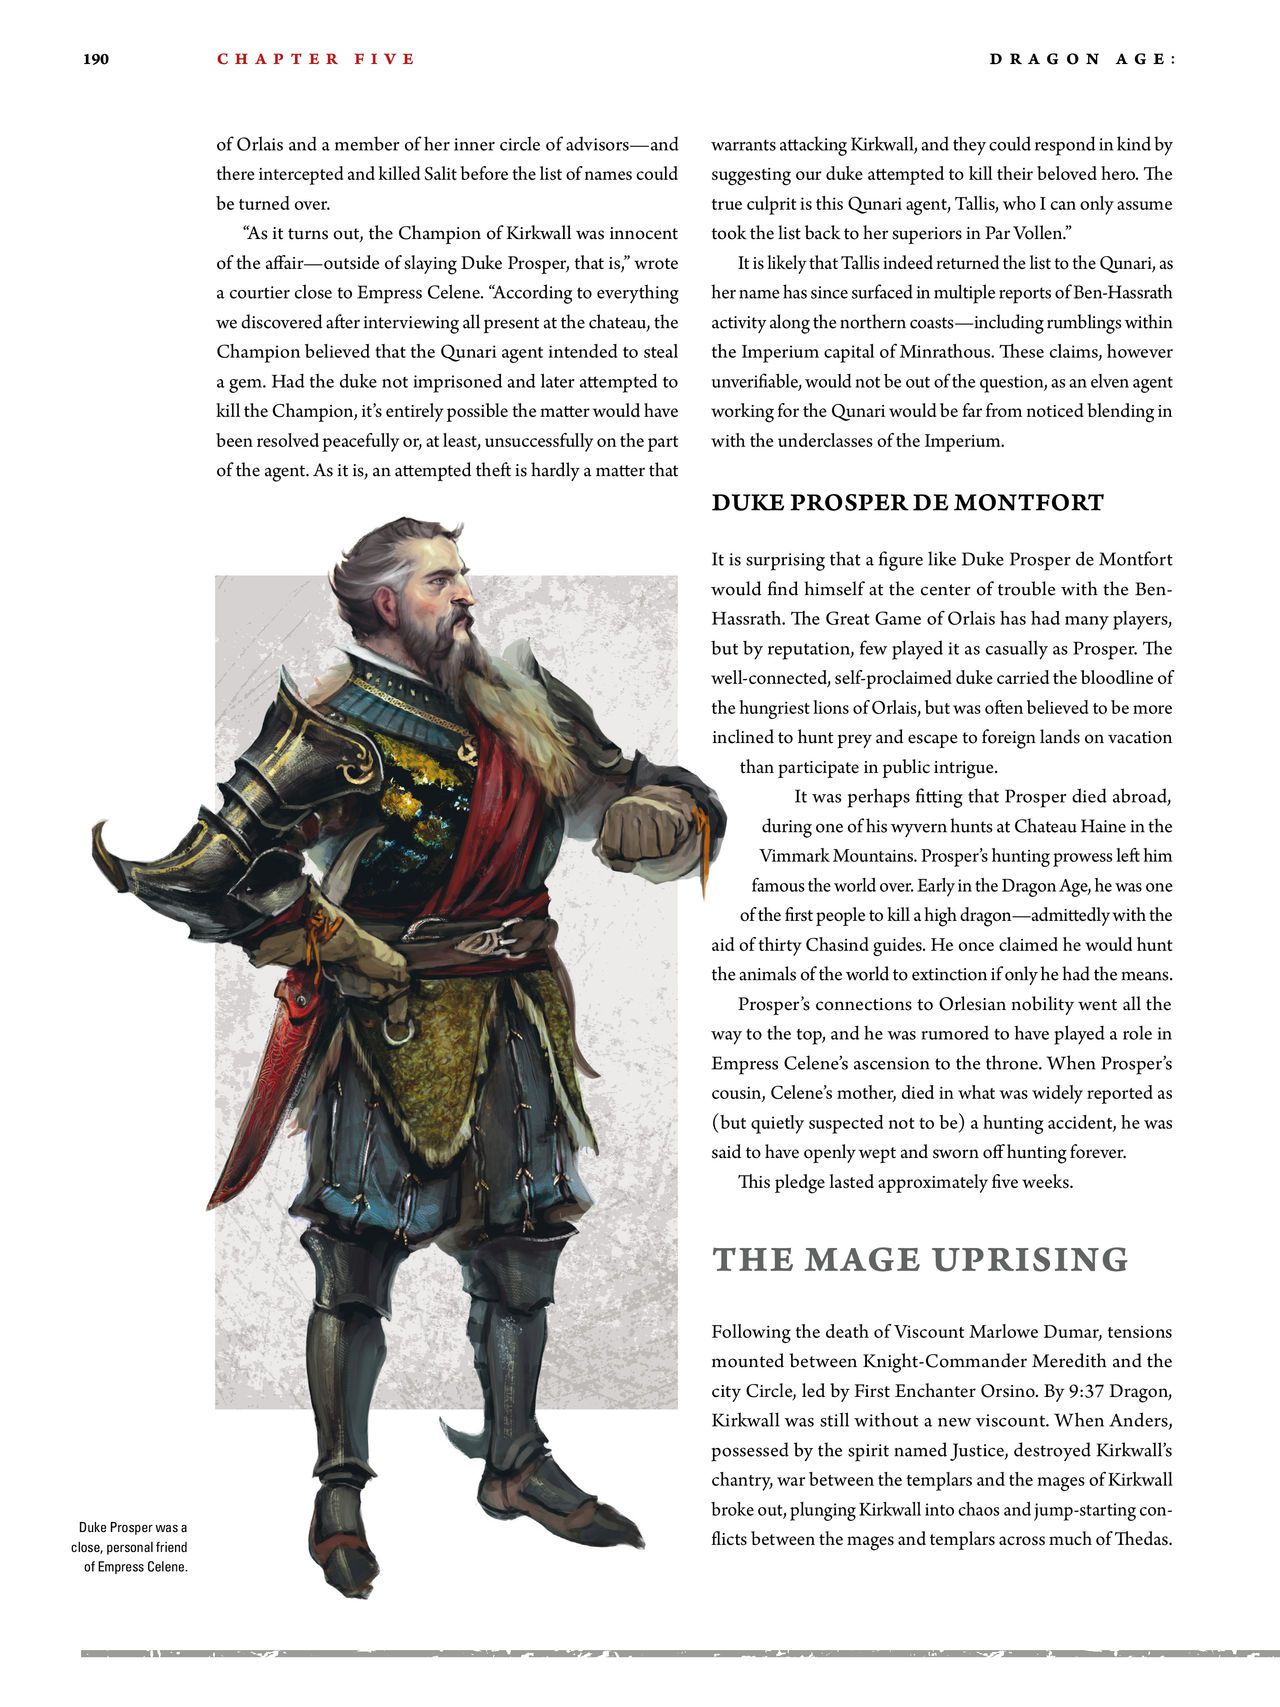 Dragon Age - The World of Thedas v02 185